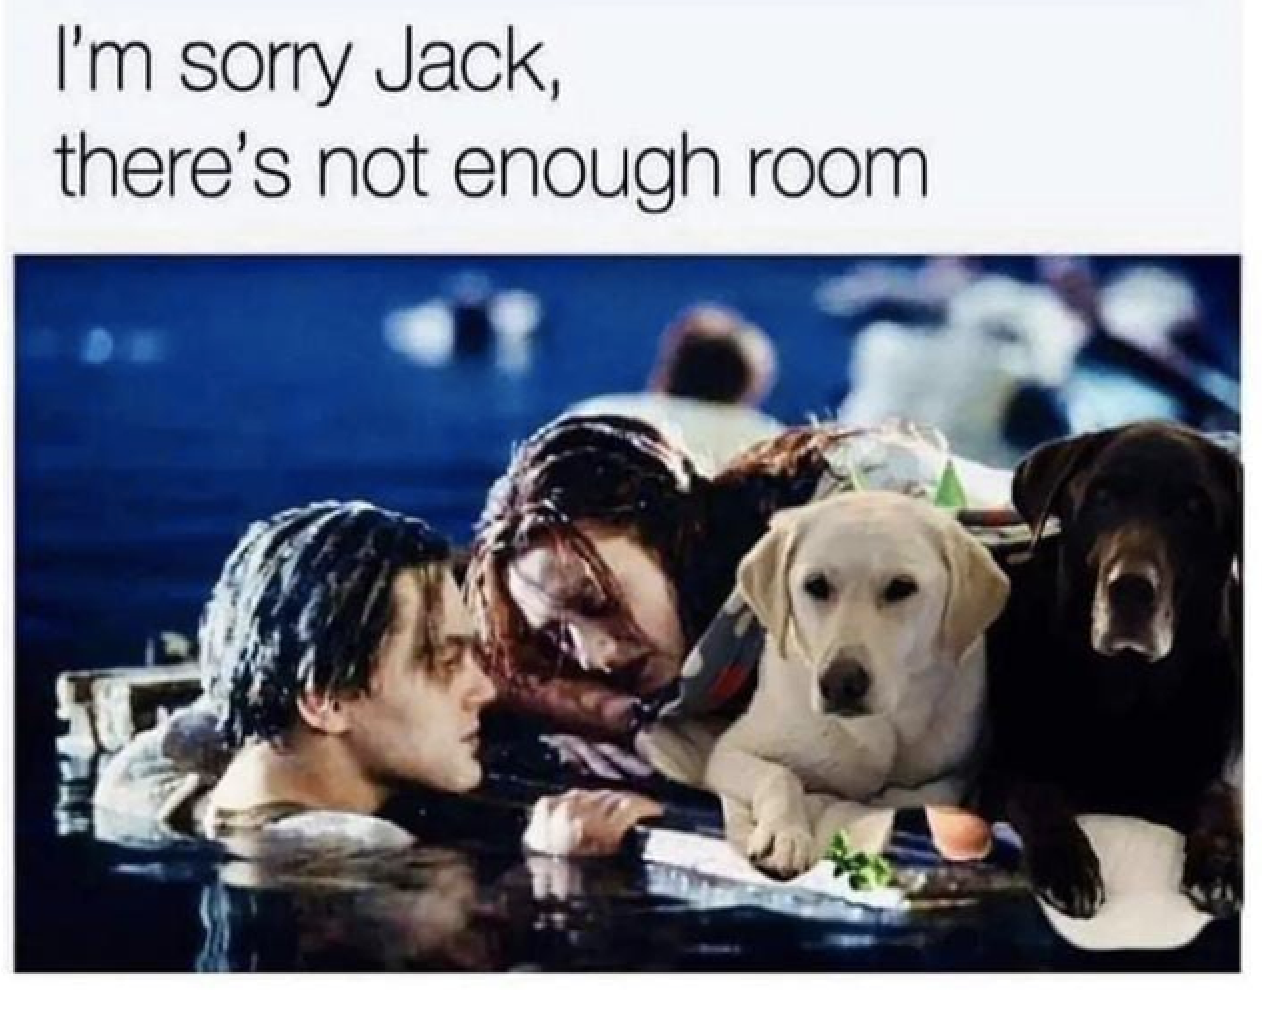 &quot;I&#x27;m sorry Jack, there&#x27;s not enough room&quot;